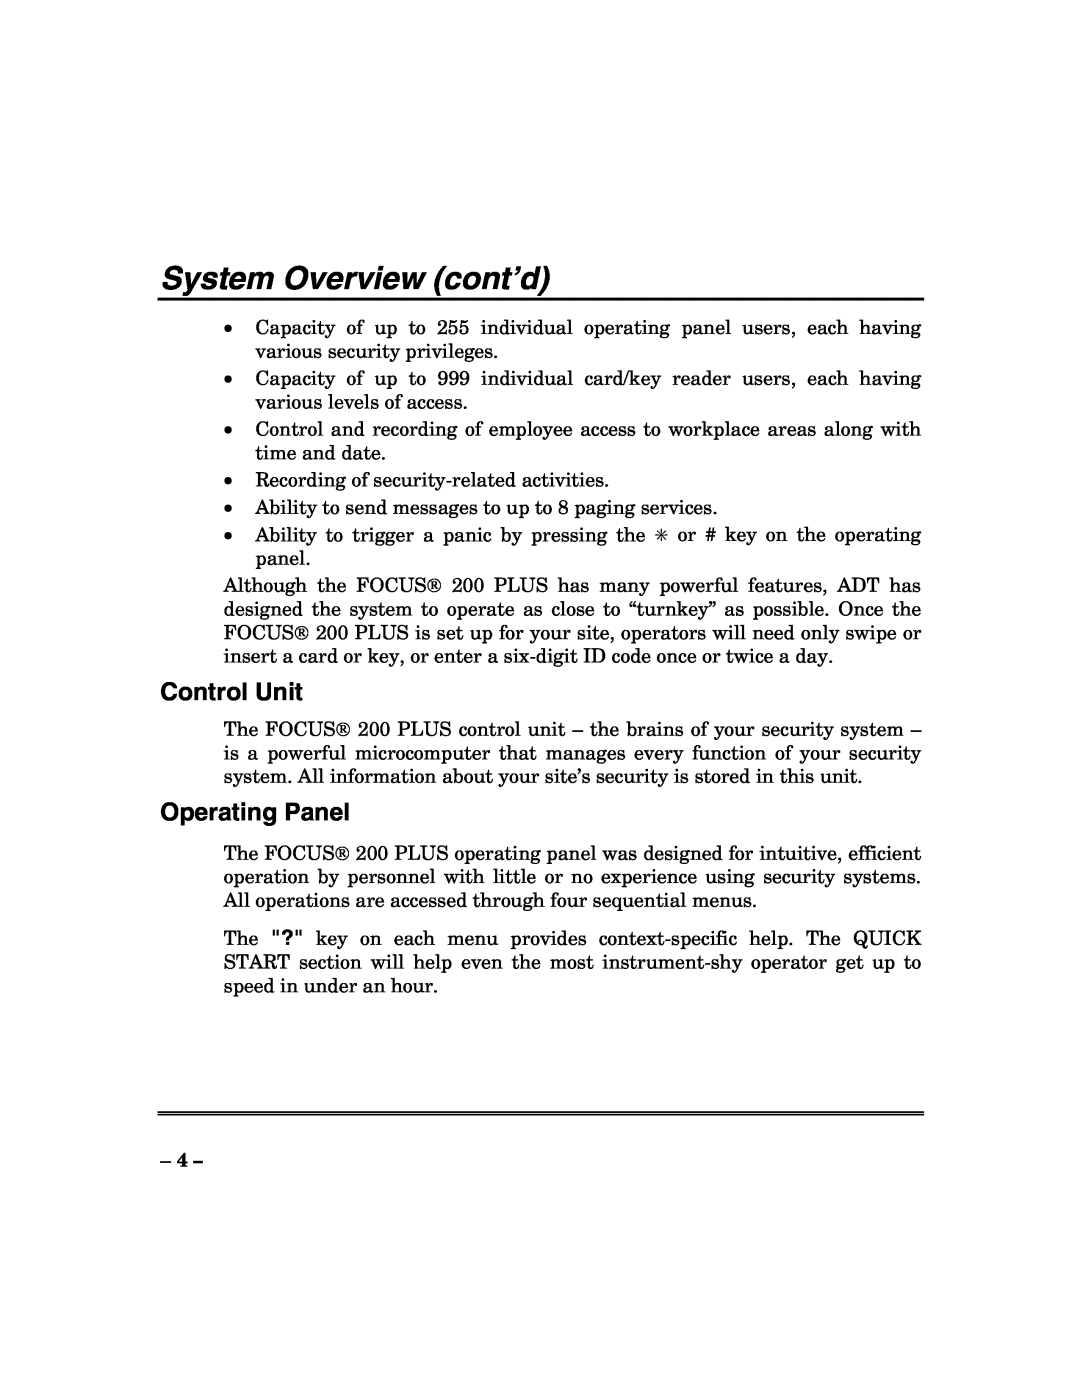 ADT Security Services 200 Plus manual System Overview cont’d, Control Unit, Operating Panel 